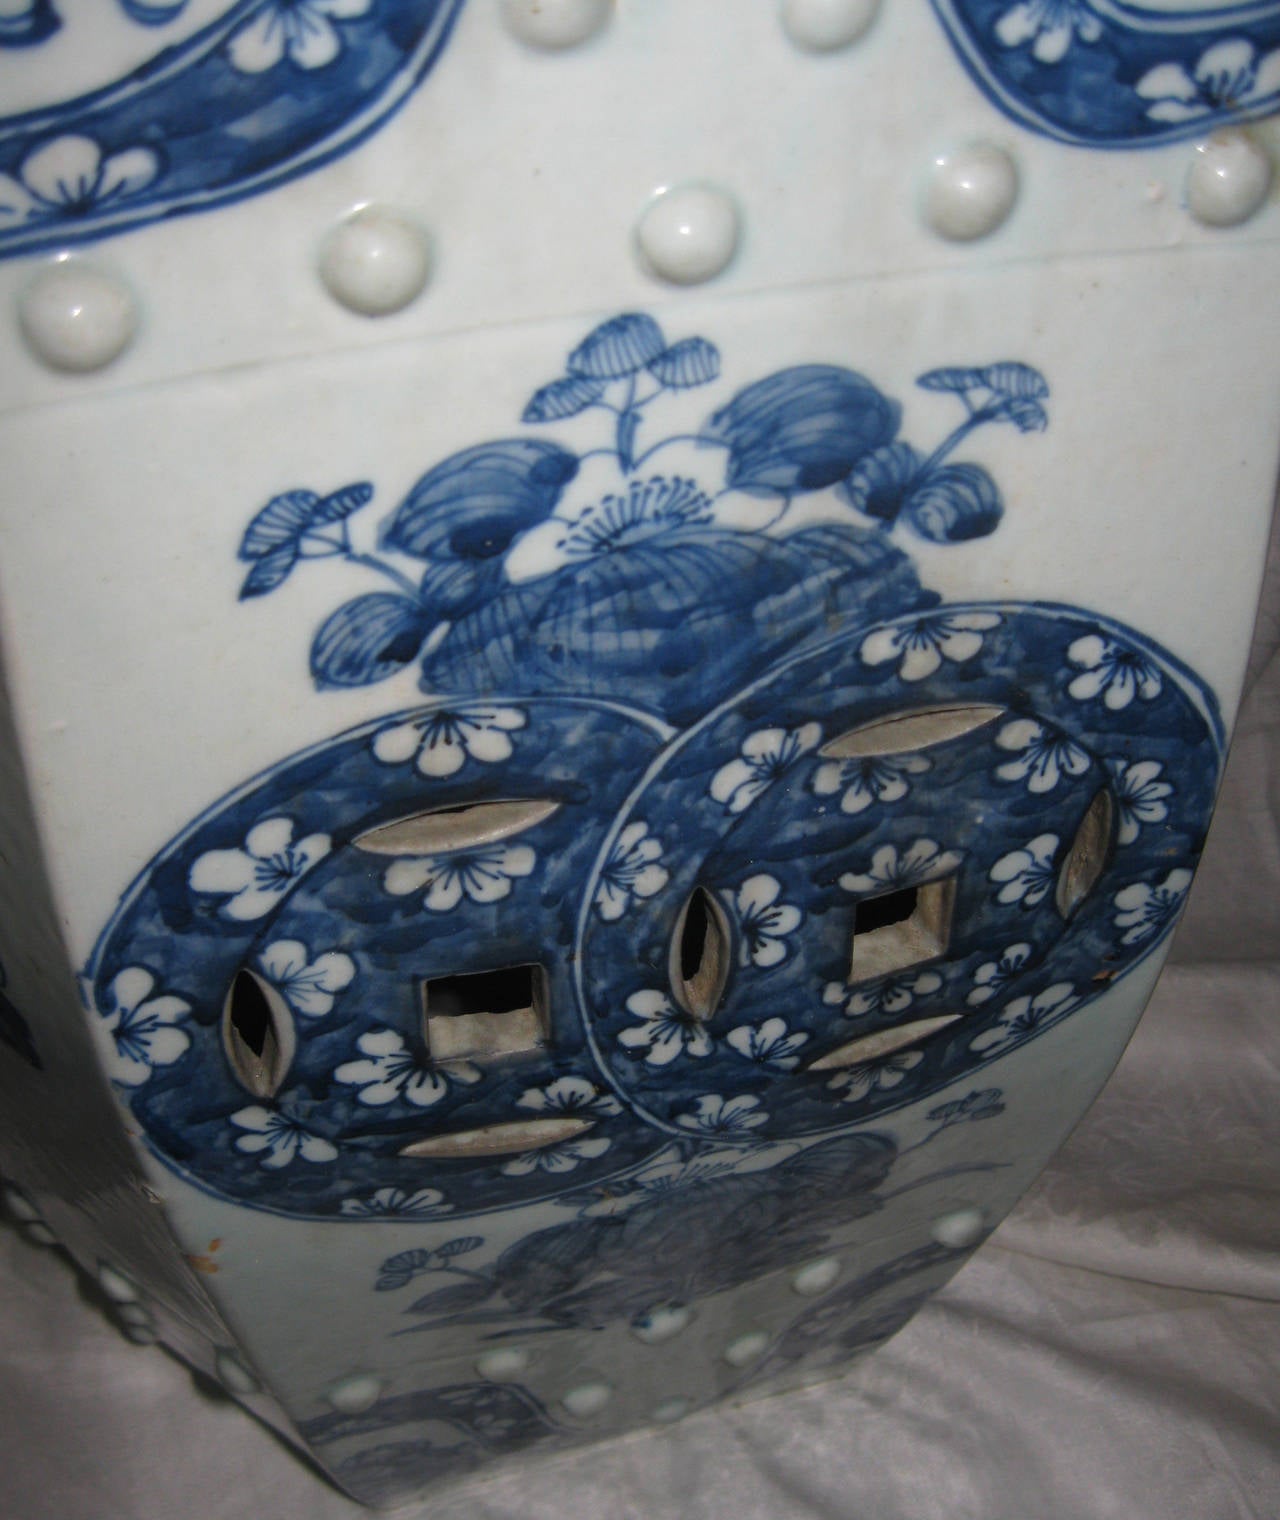 20th century Chinese Export Porcelain Garden Seat For Sale 2